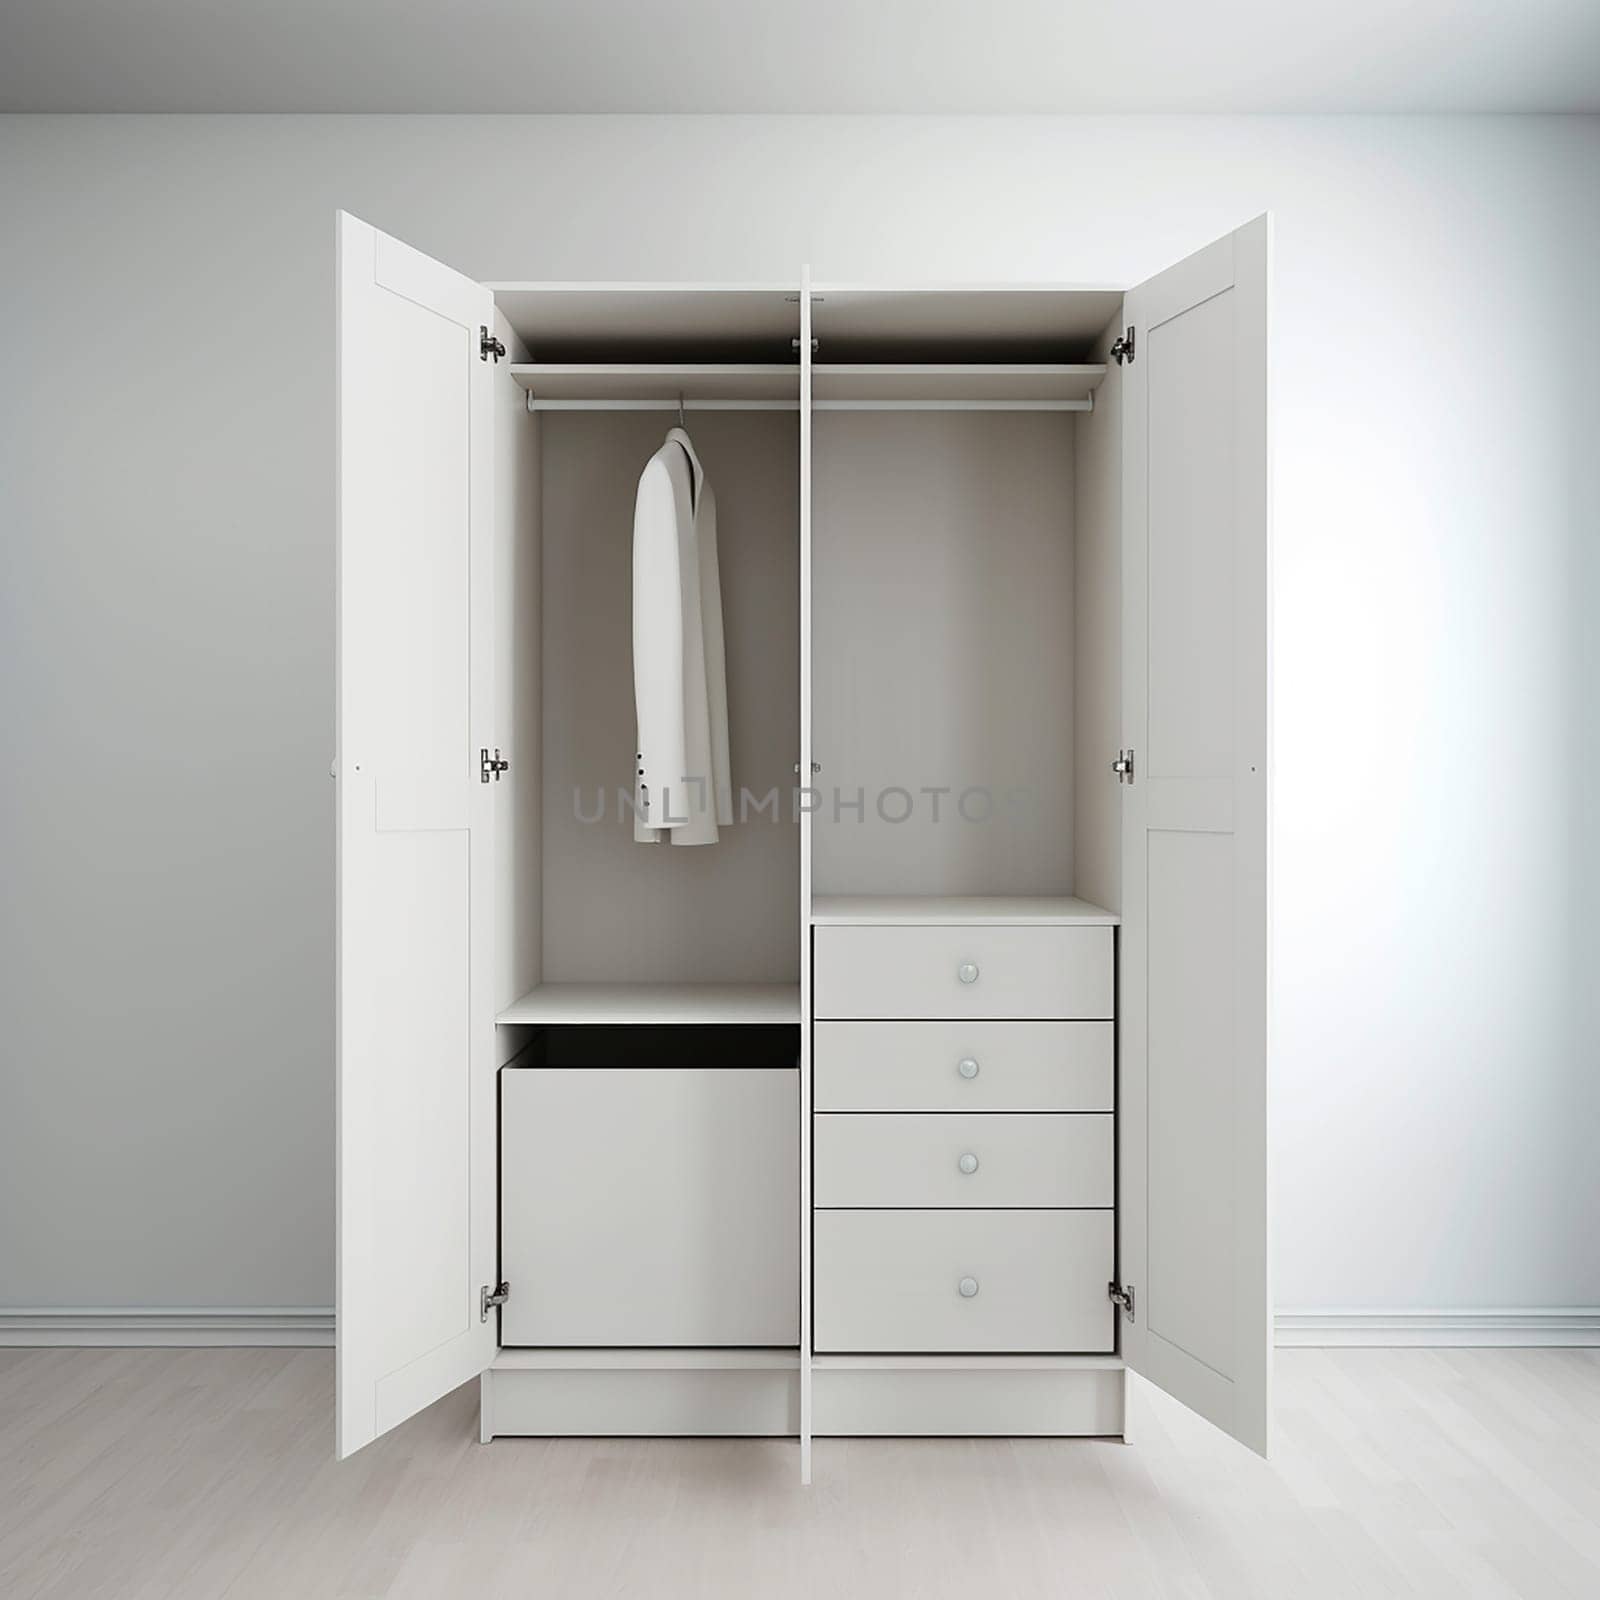 A modern white wardrobe with drawers and shelves for clothing storage and organization